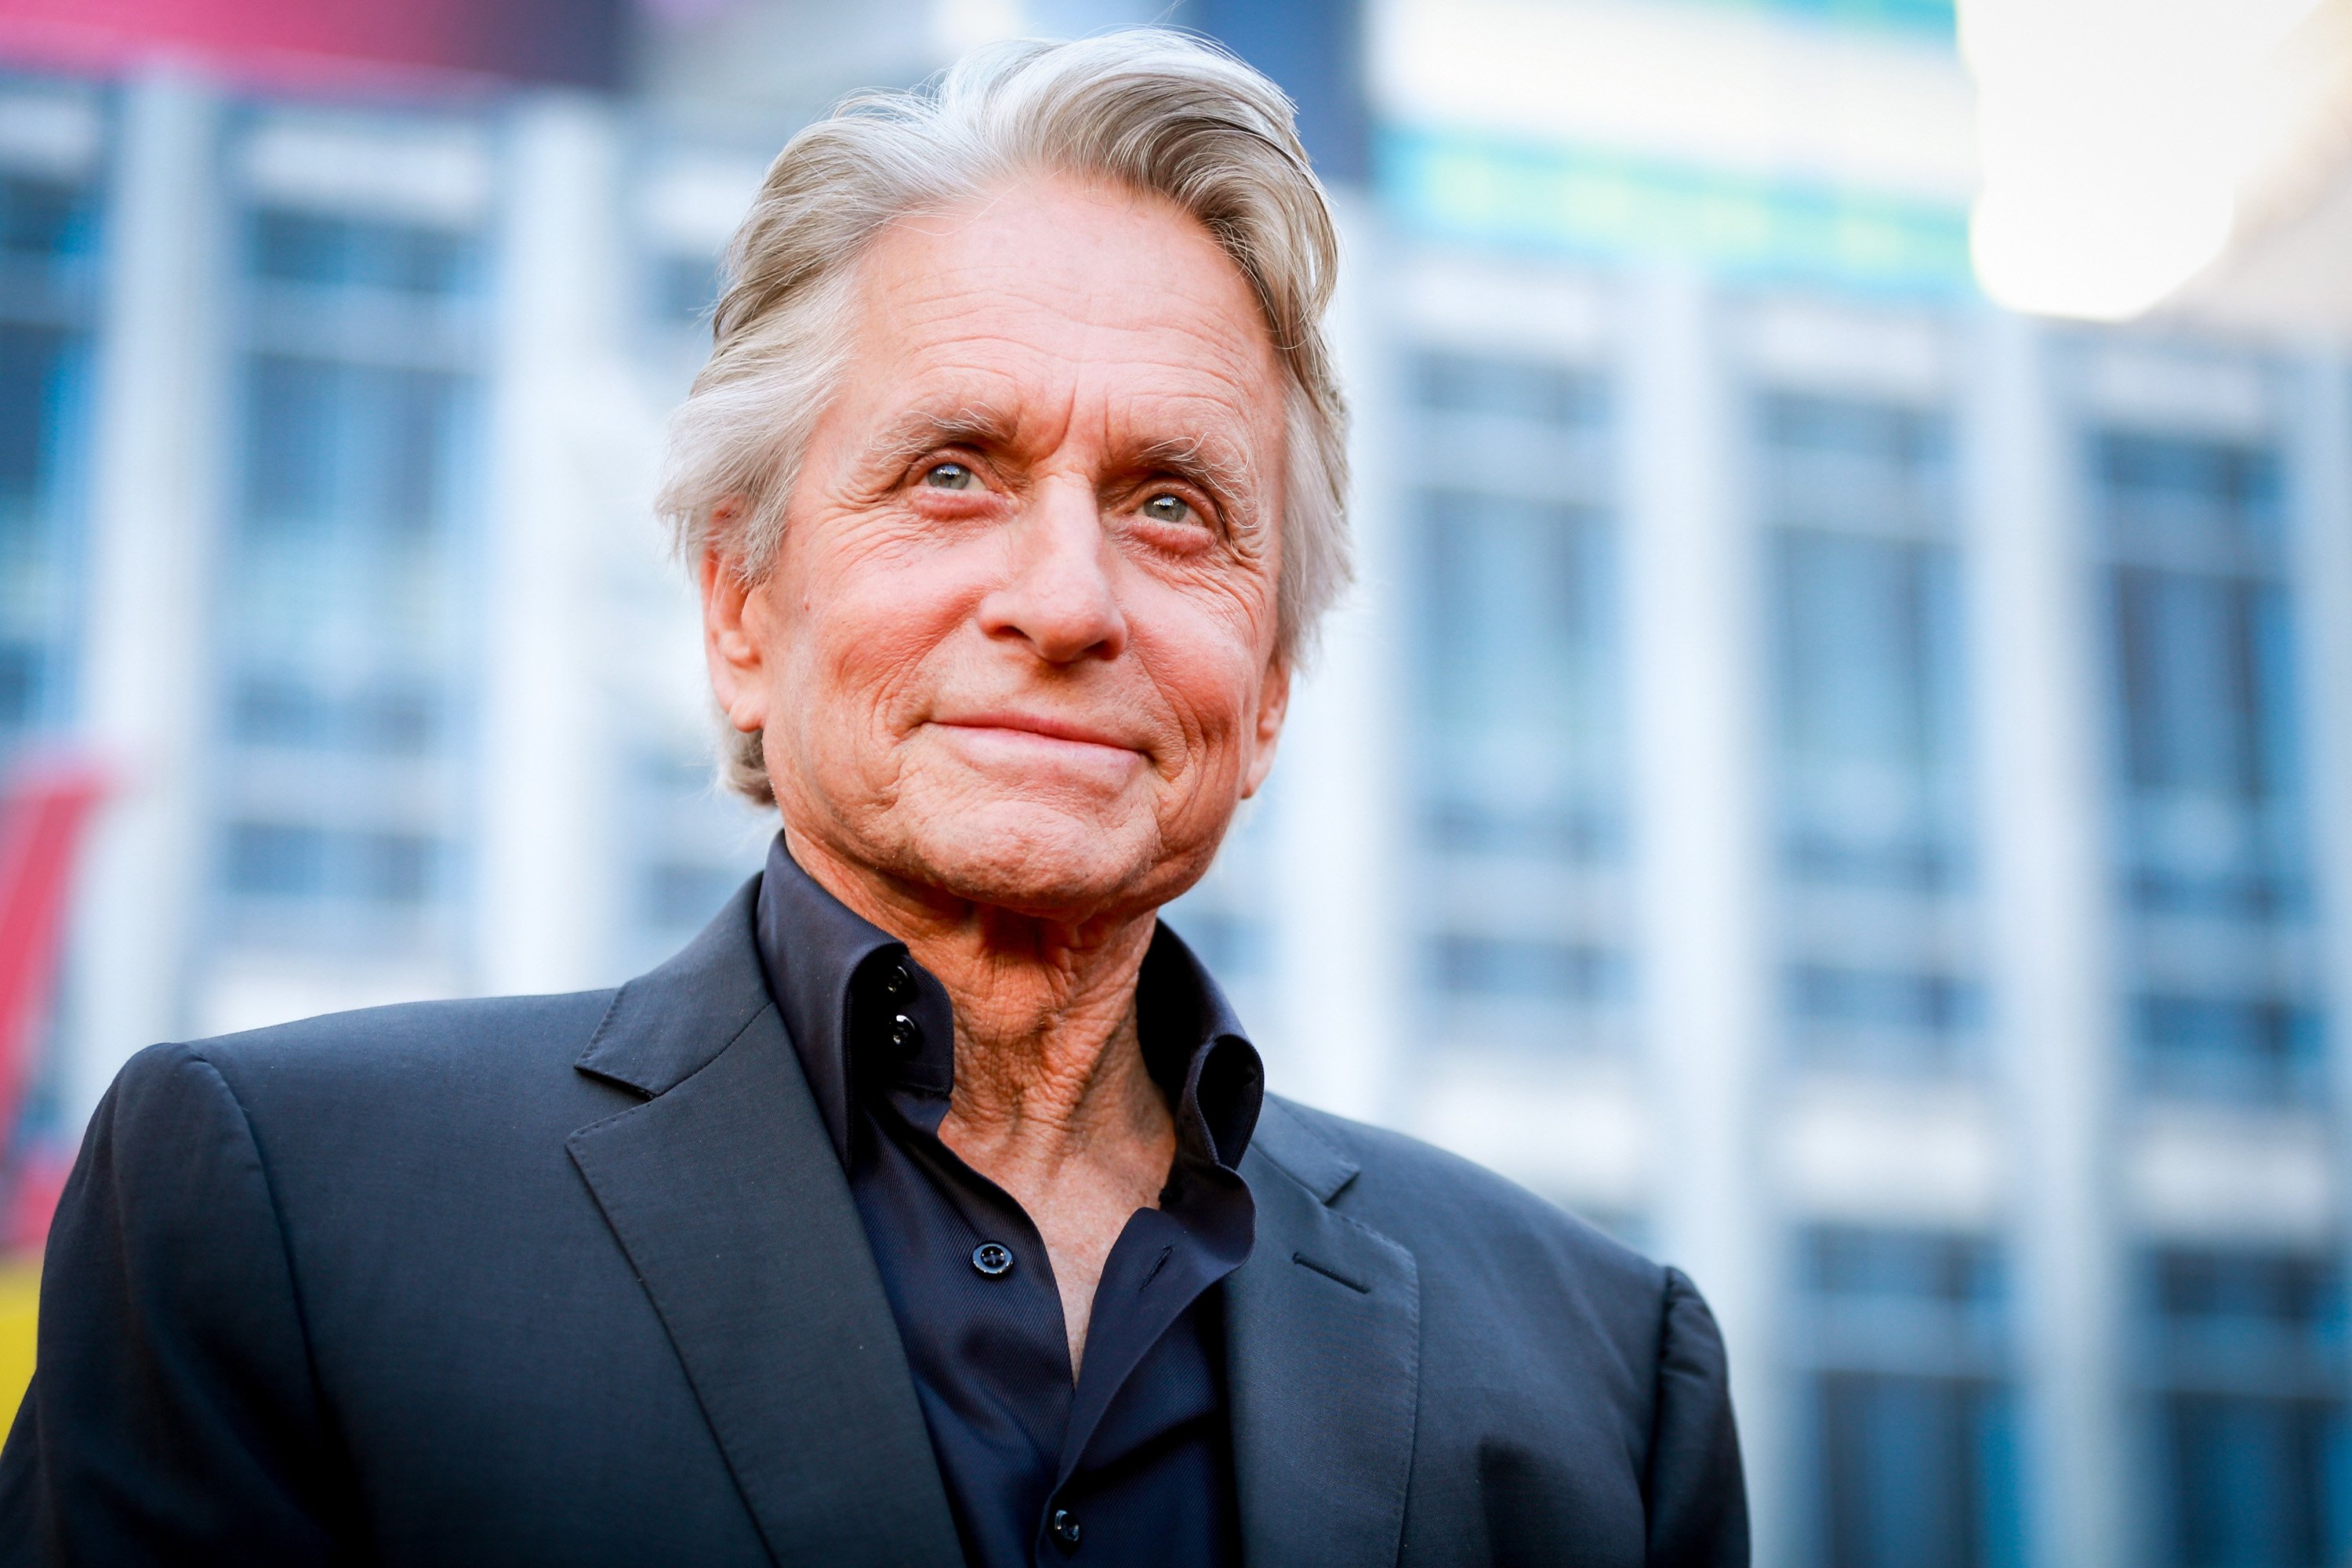 Michael Douglas attends the premiere of Disney And Marvel's 'Ant-Man And The Wasp' on June 25, 2018  | Photo: GettyImages